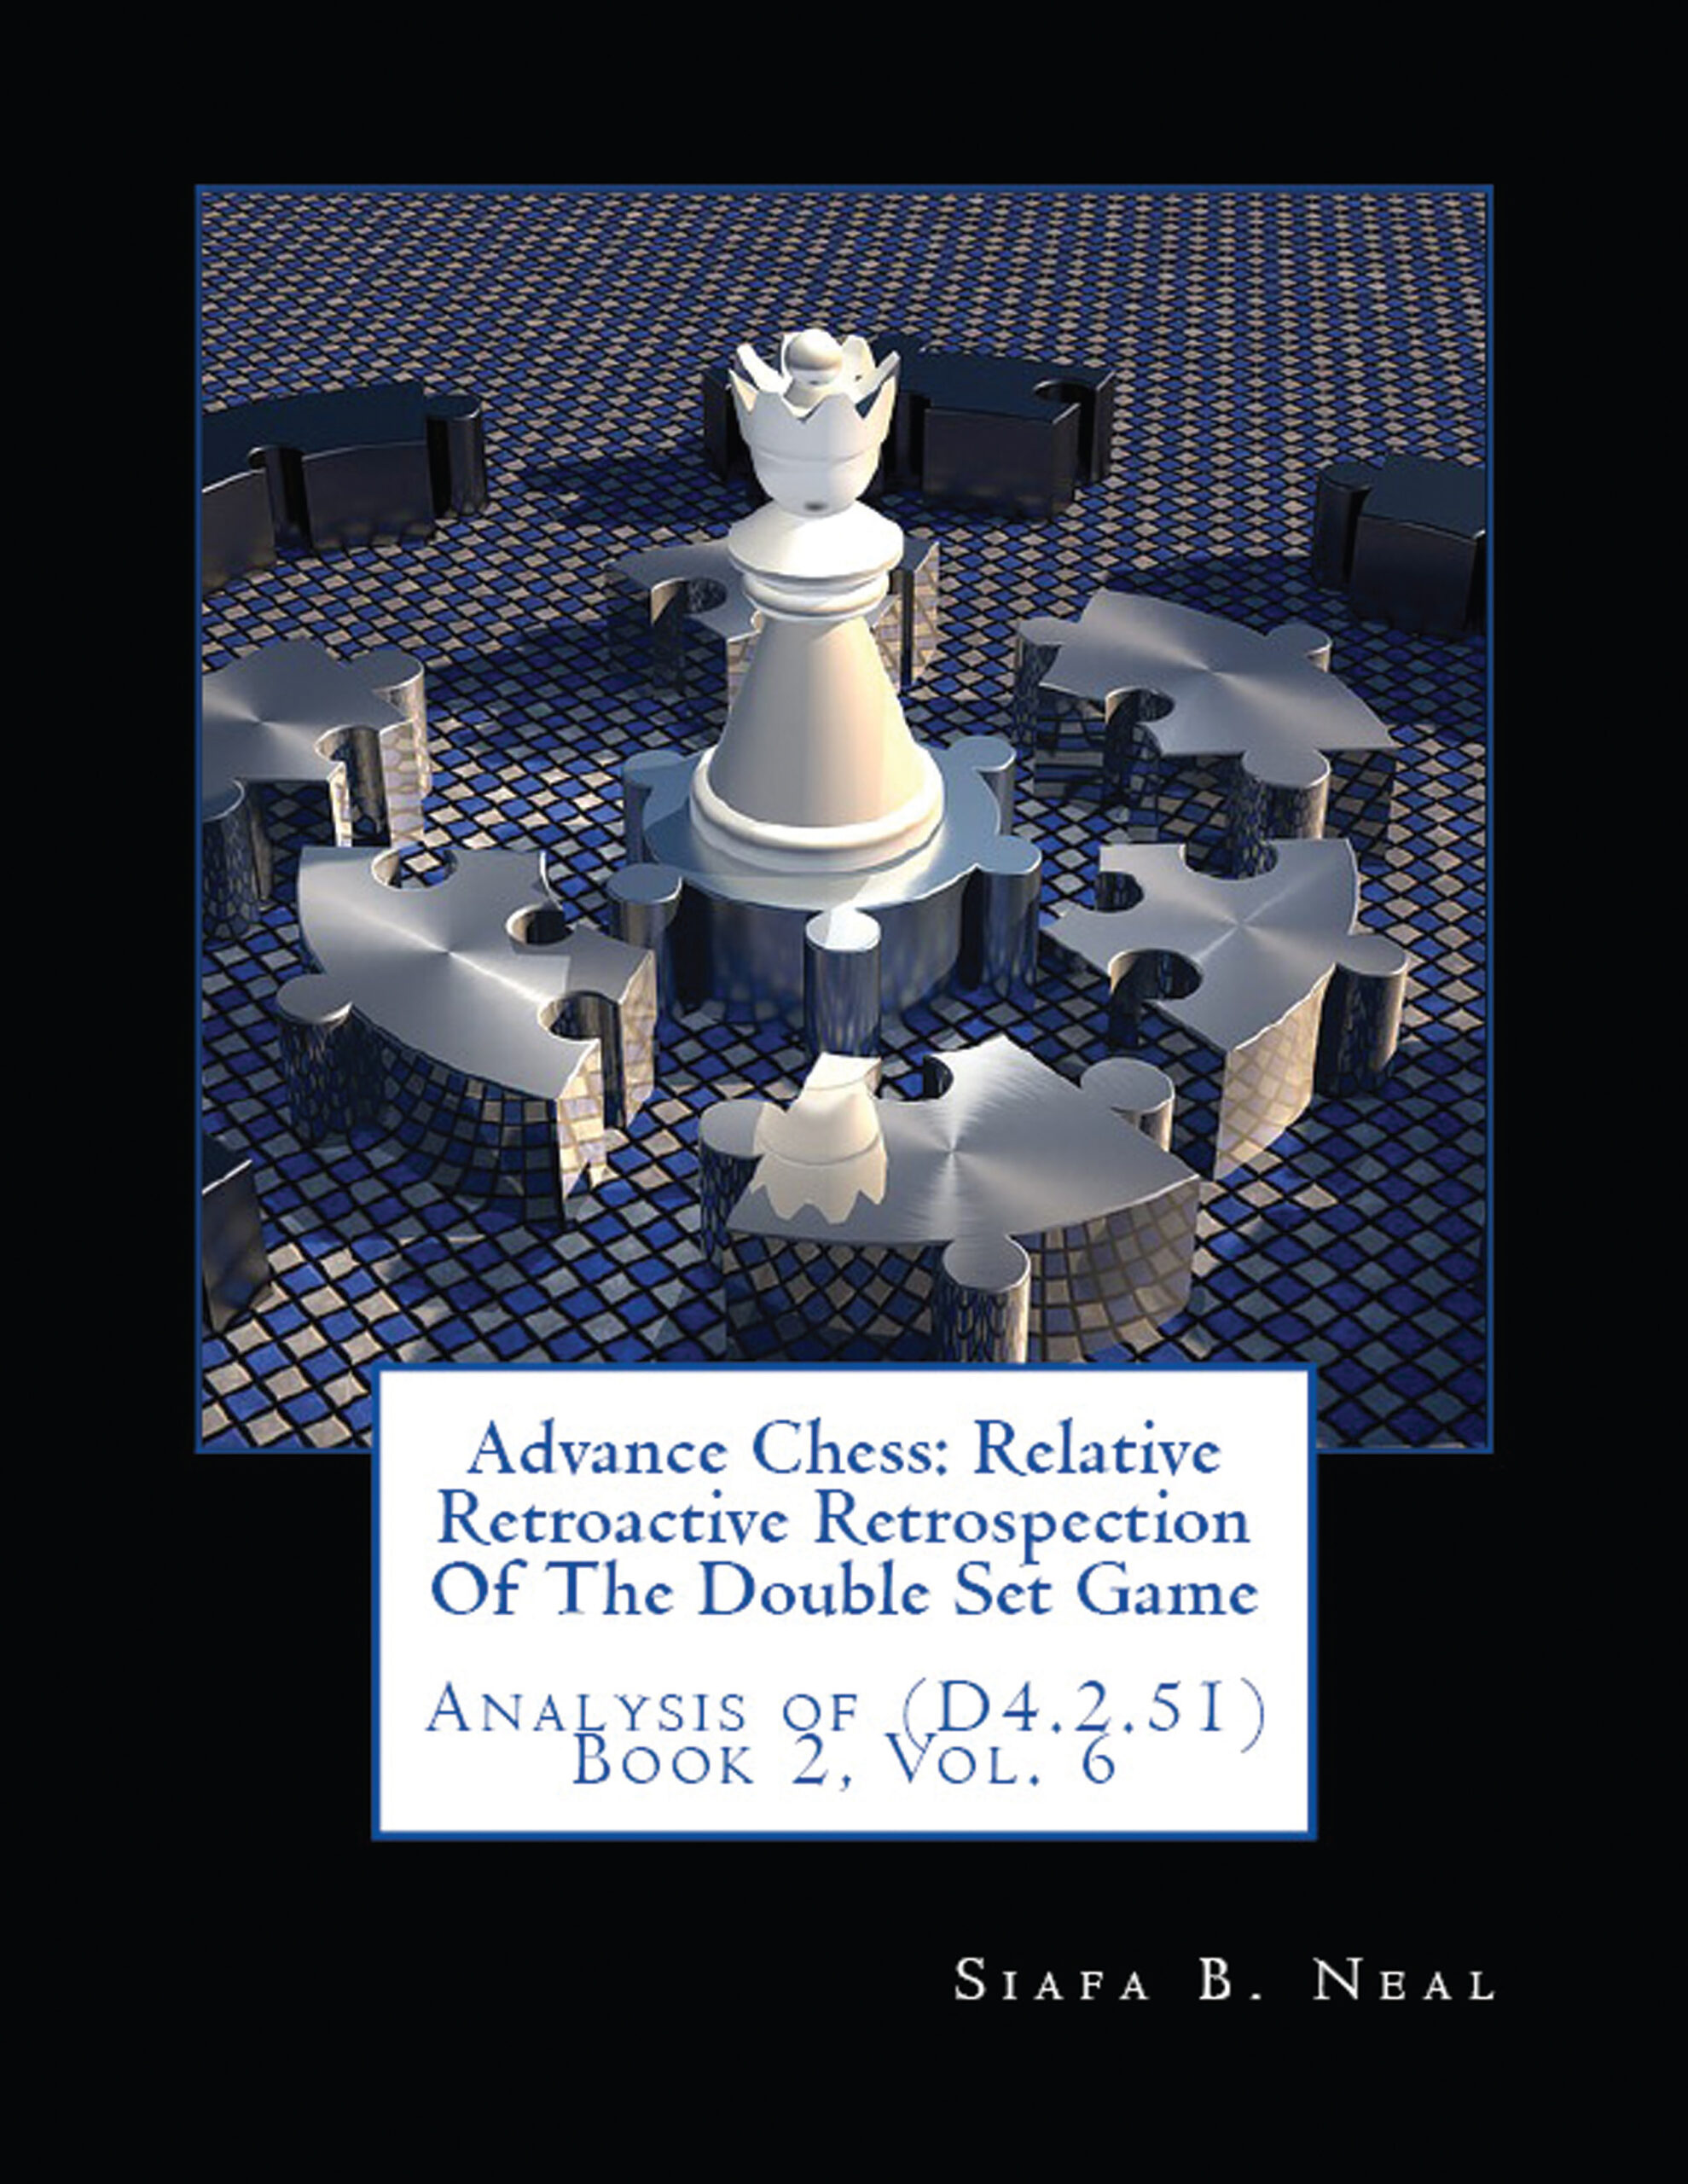 Advance Chess Relative Retroactive Retrospection of the Double Set Game